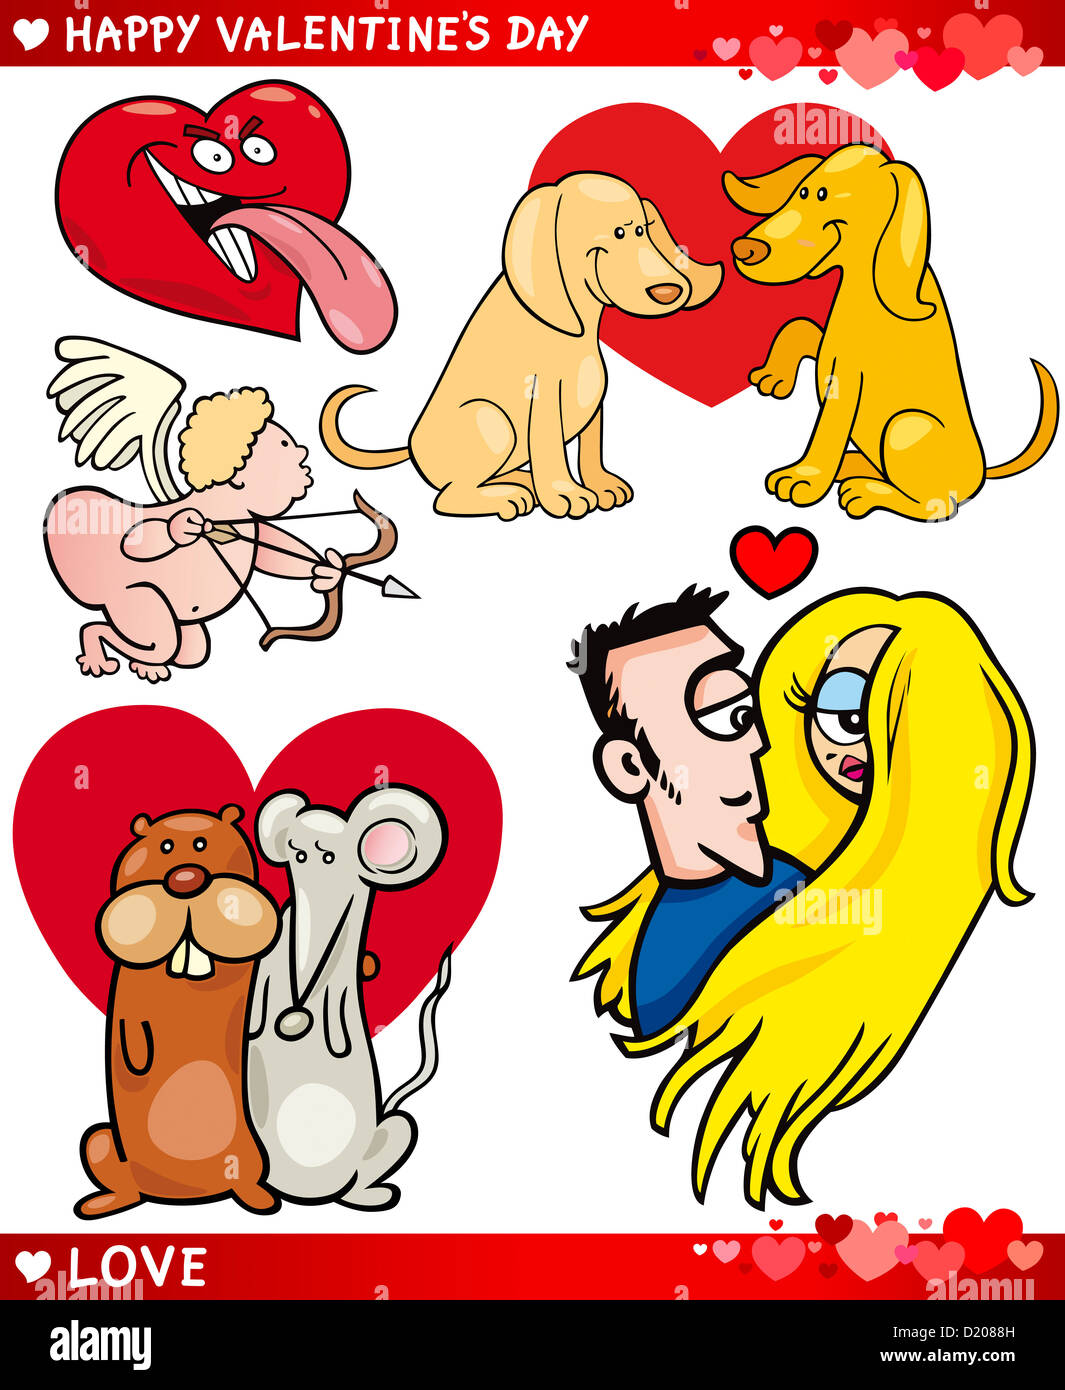 Cartoon Illustration of Cute Valentine's Day and Love Themes Collection Set Stock Photo